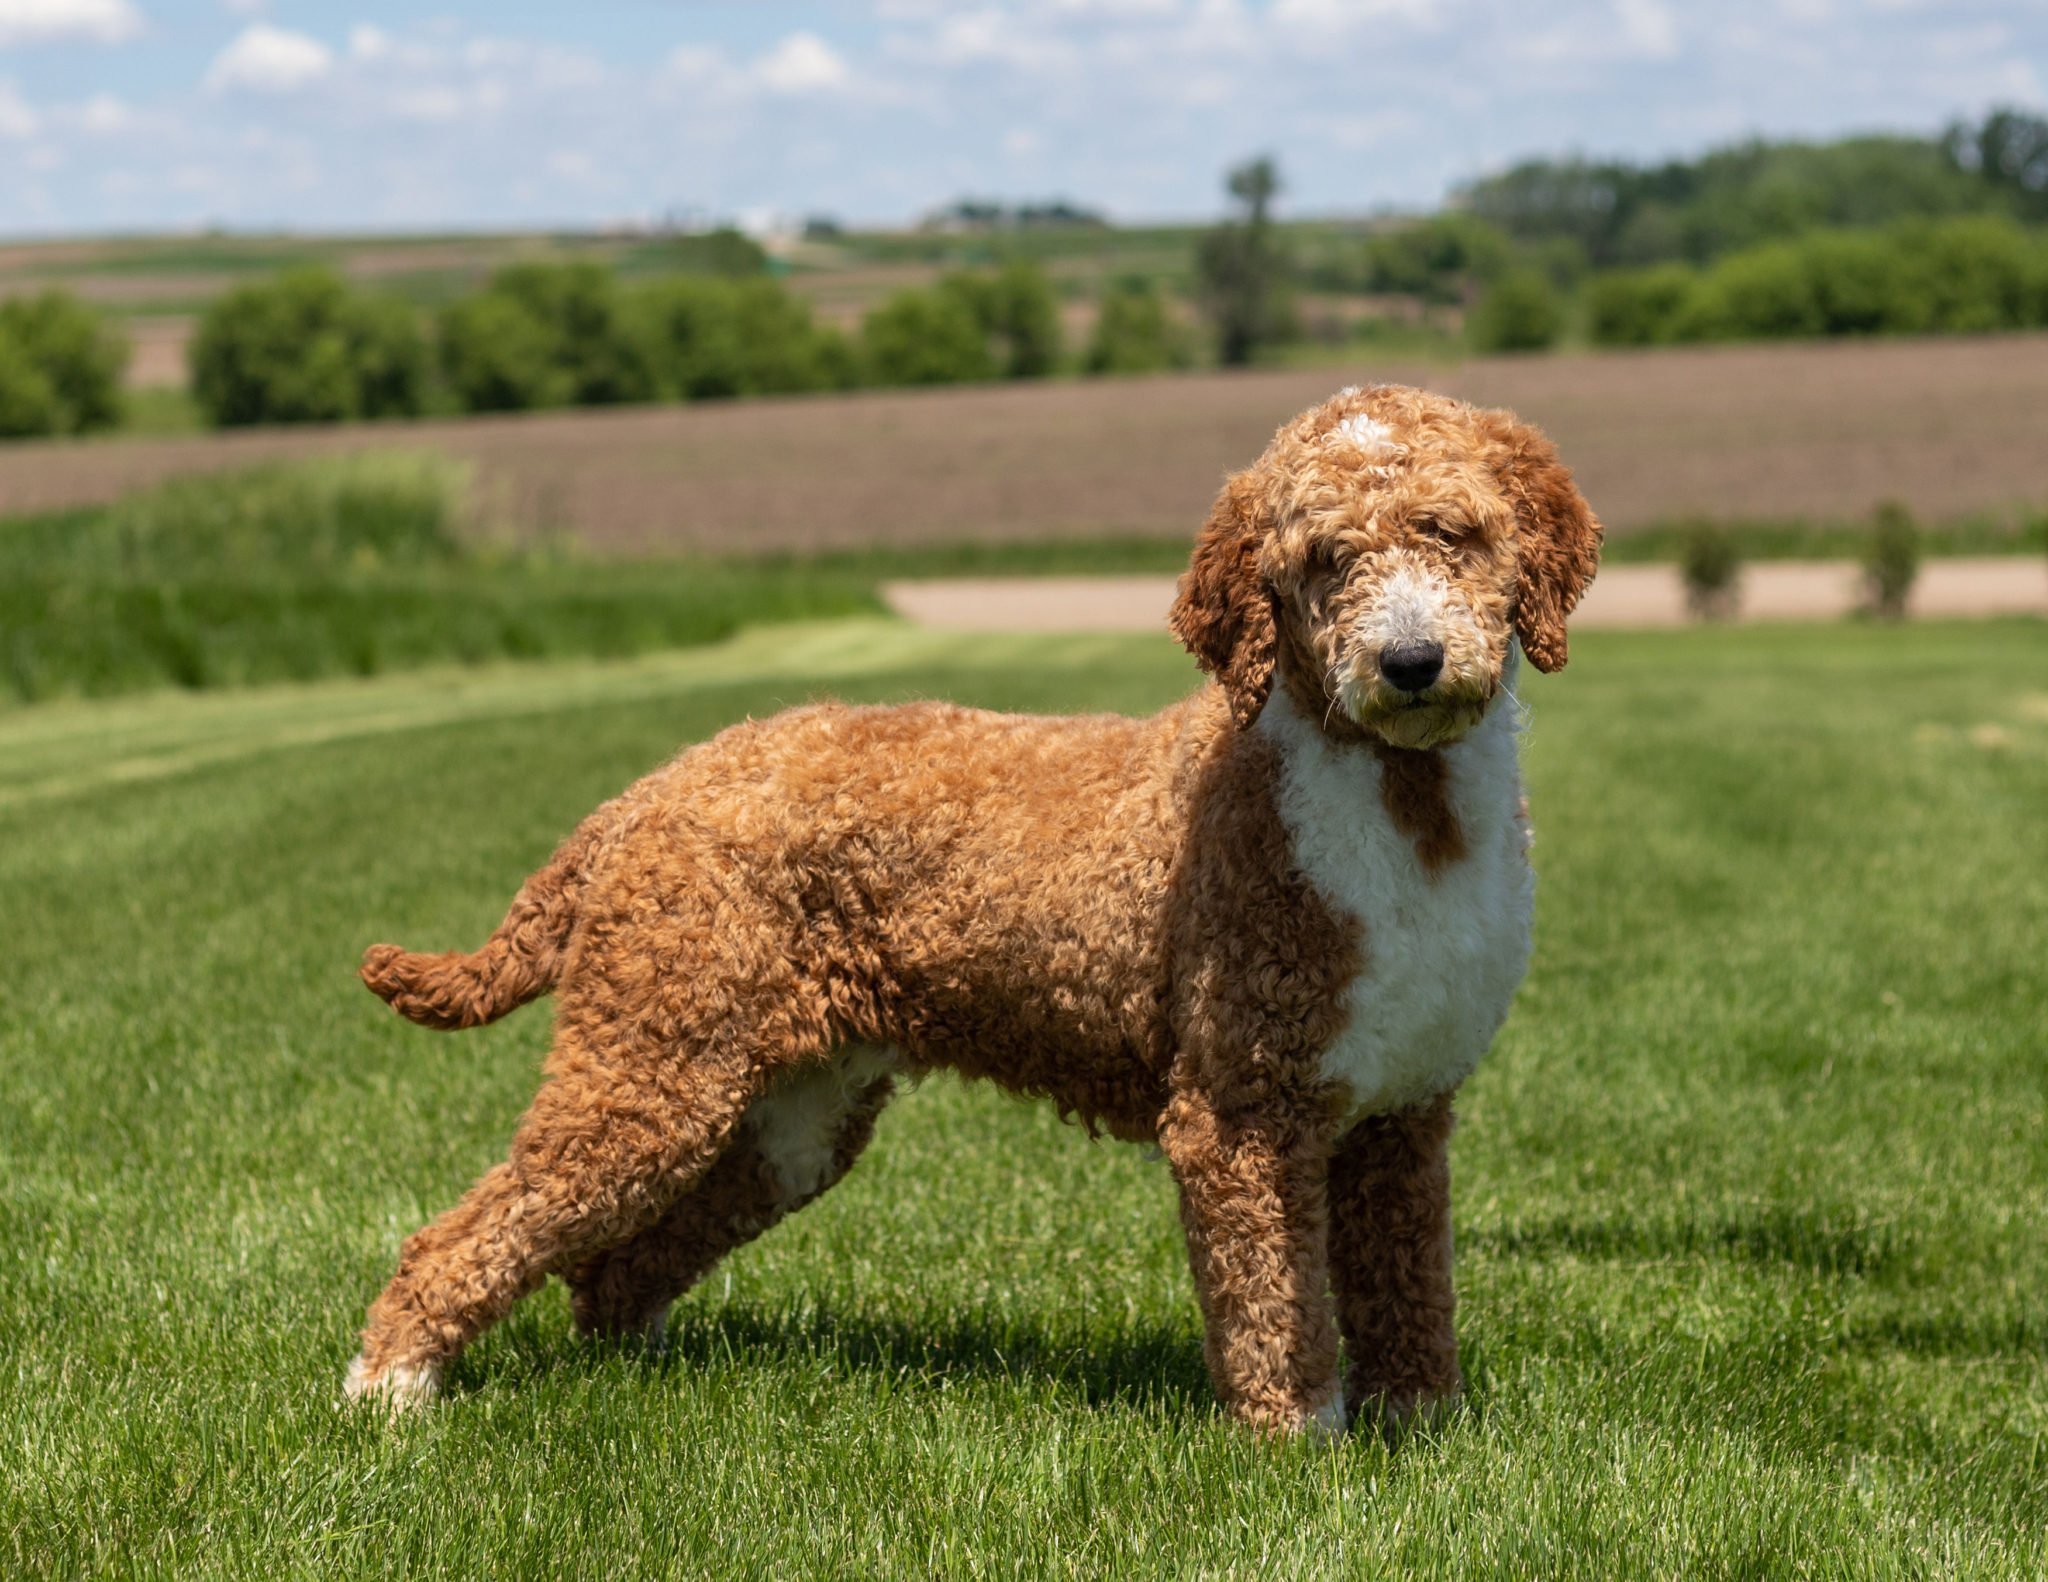 A litter of Standard Irish Doodles raised in Iowa by Poodles 2 Doodles